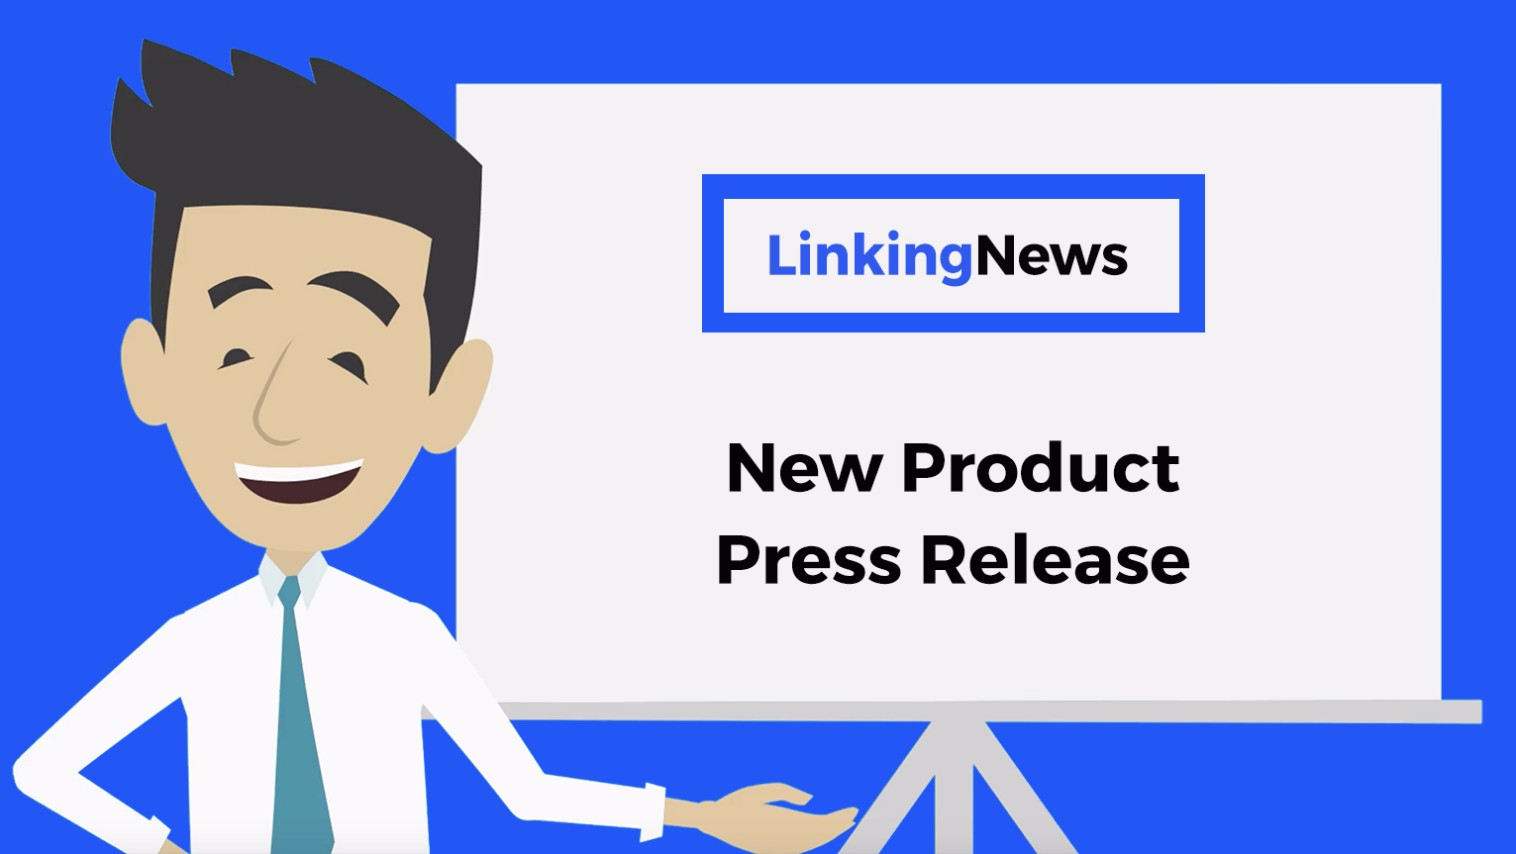 Linking News - How To Write A Press Release For A New Product, New